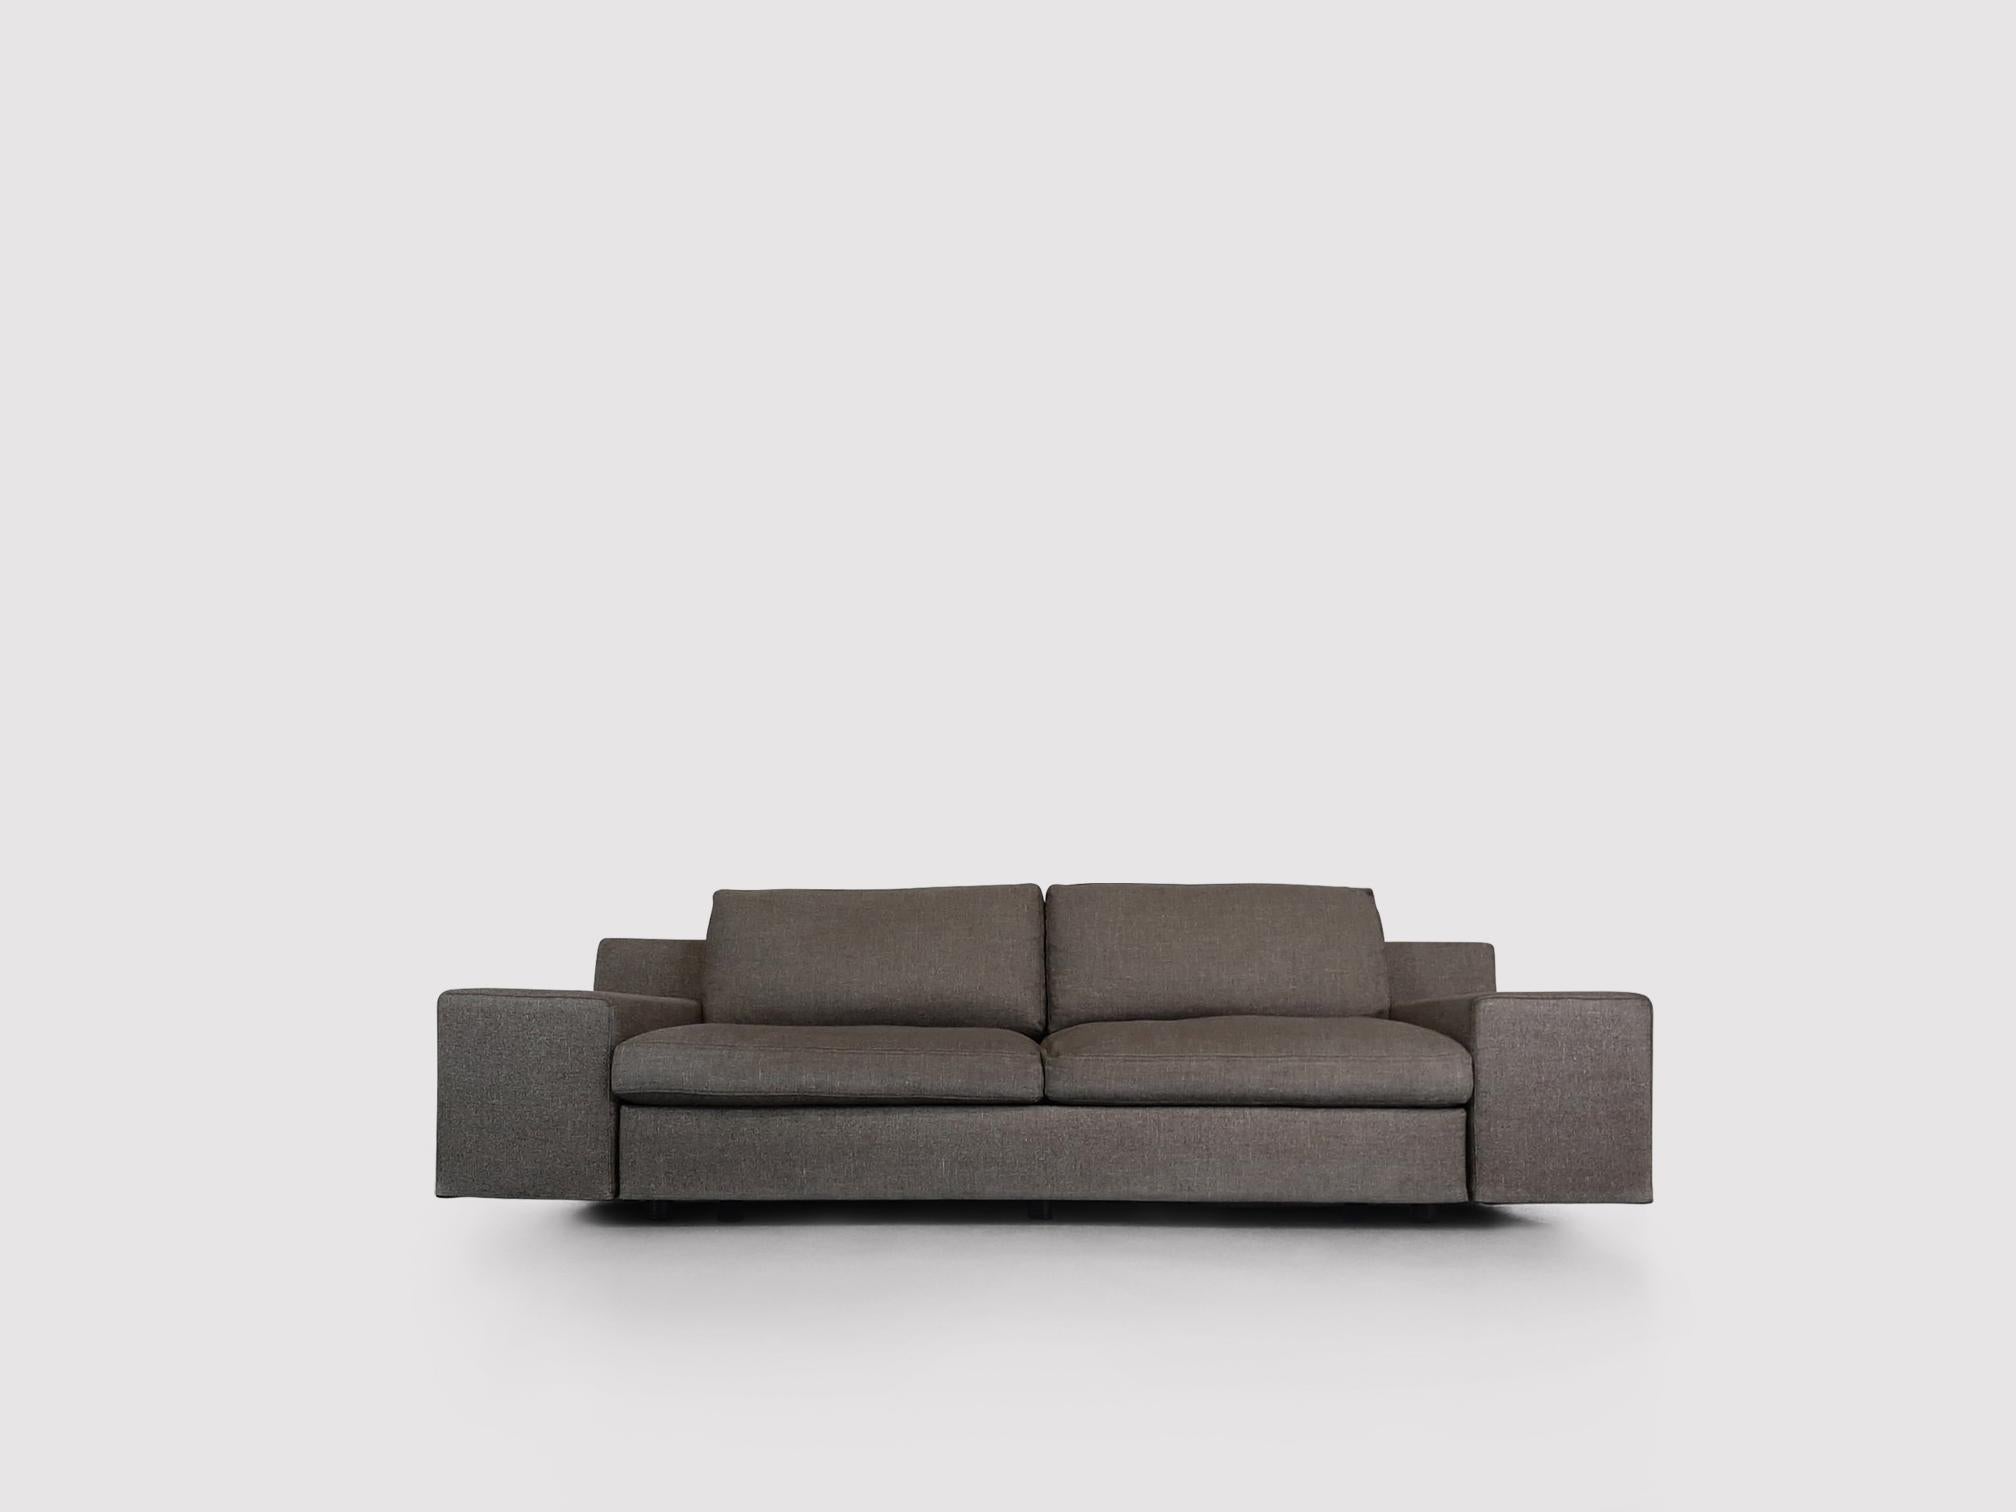 Straight forward but ingenious design by Philippe Starck for Cassina; the MISTER sofa is a modular sofa system with a fixed base where upholstered elements can be added to in order to compose multiple arrangements. The parts basically click on a